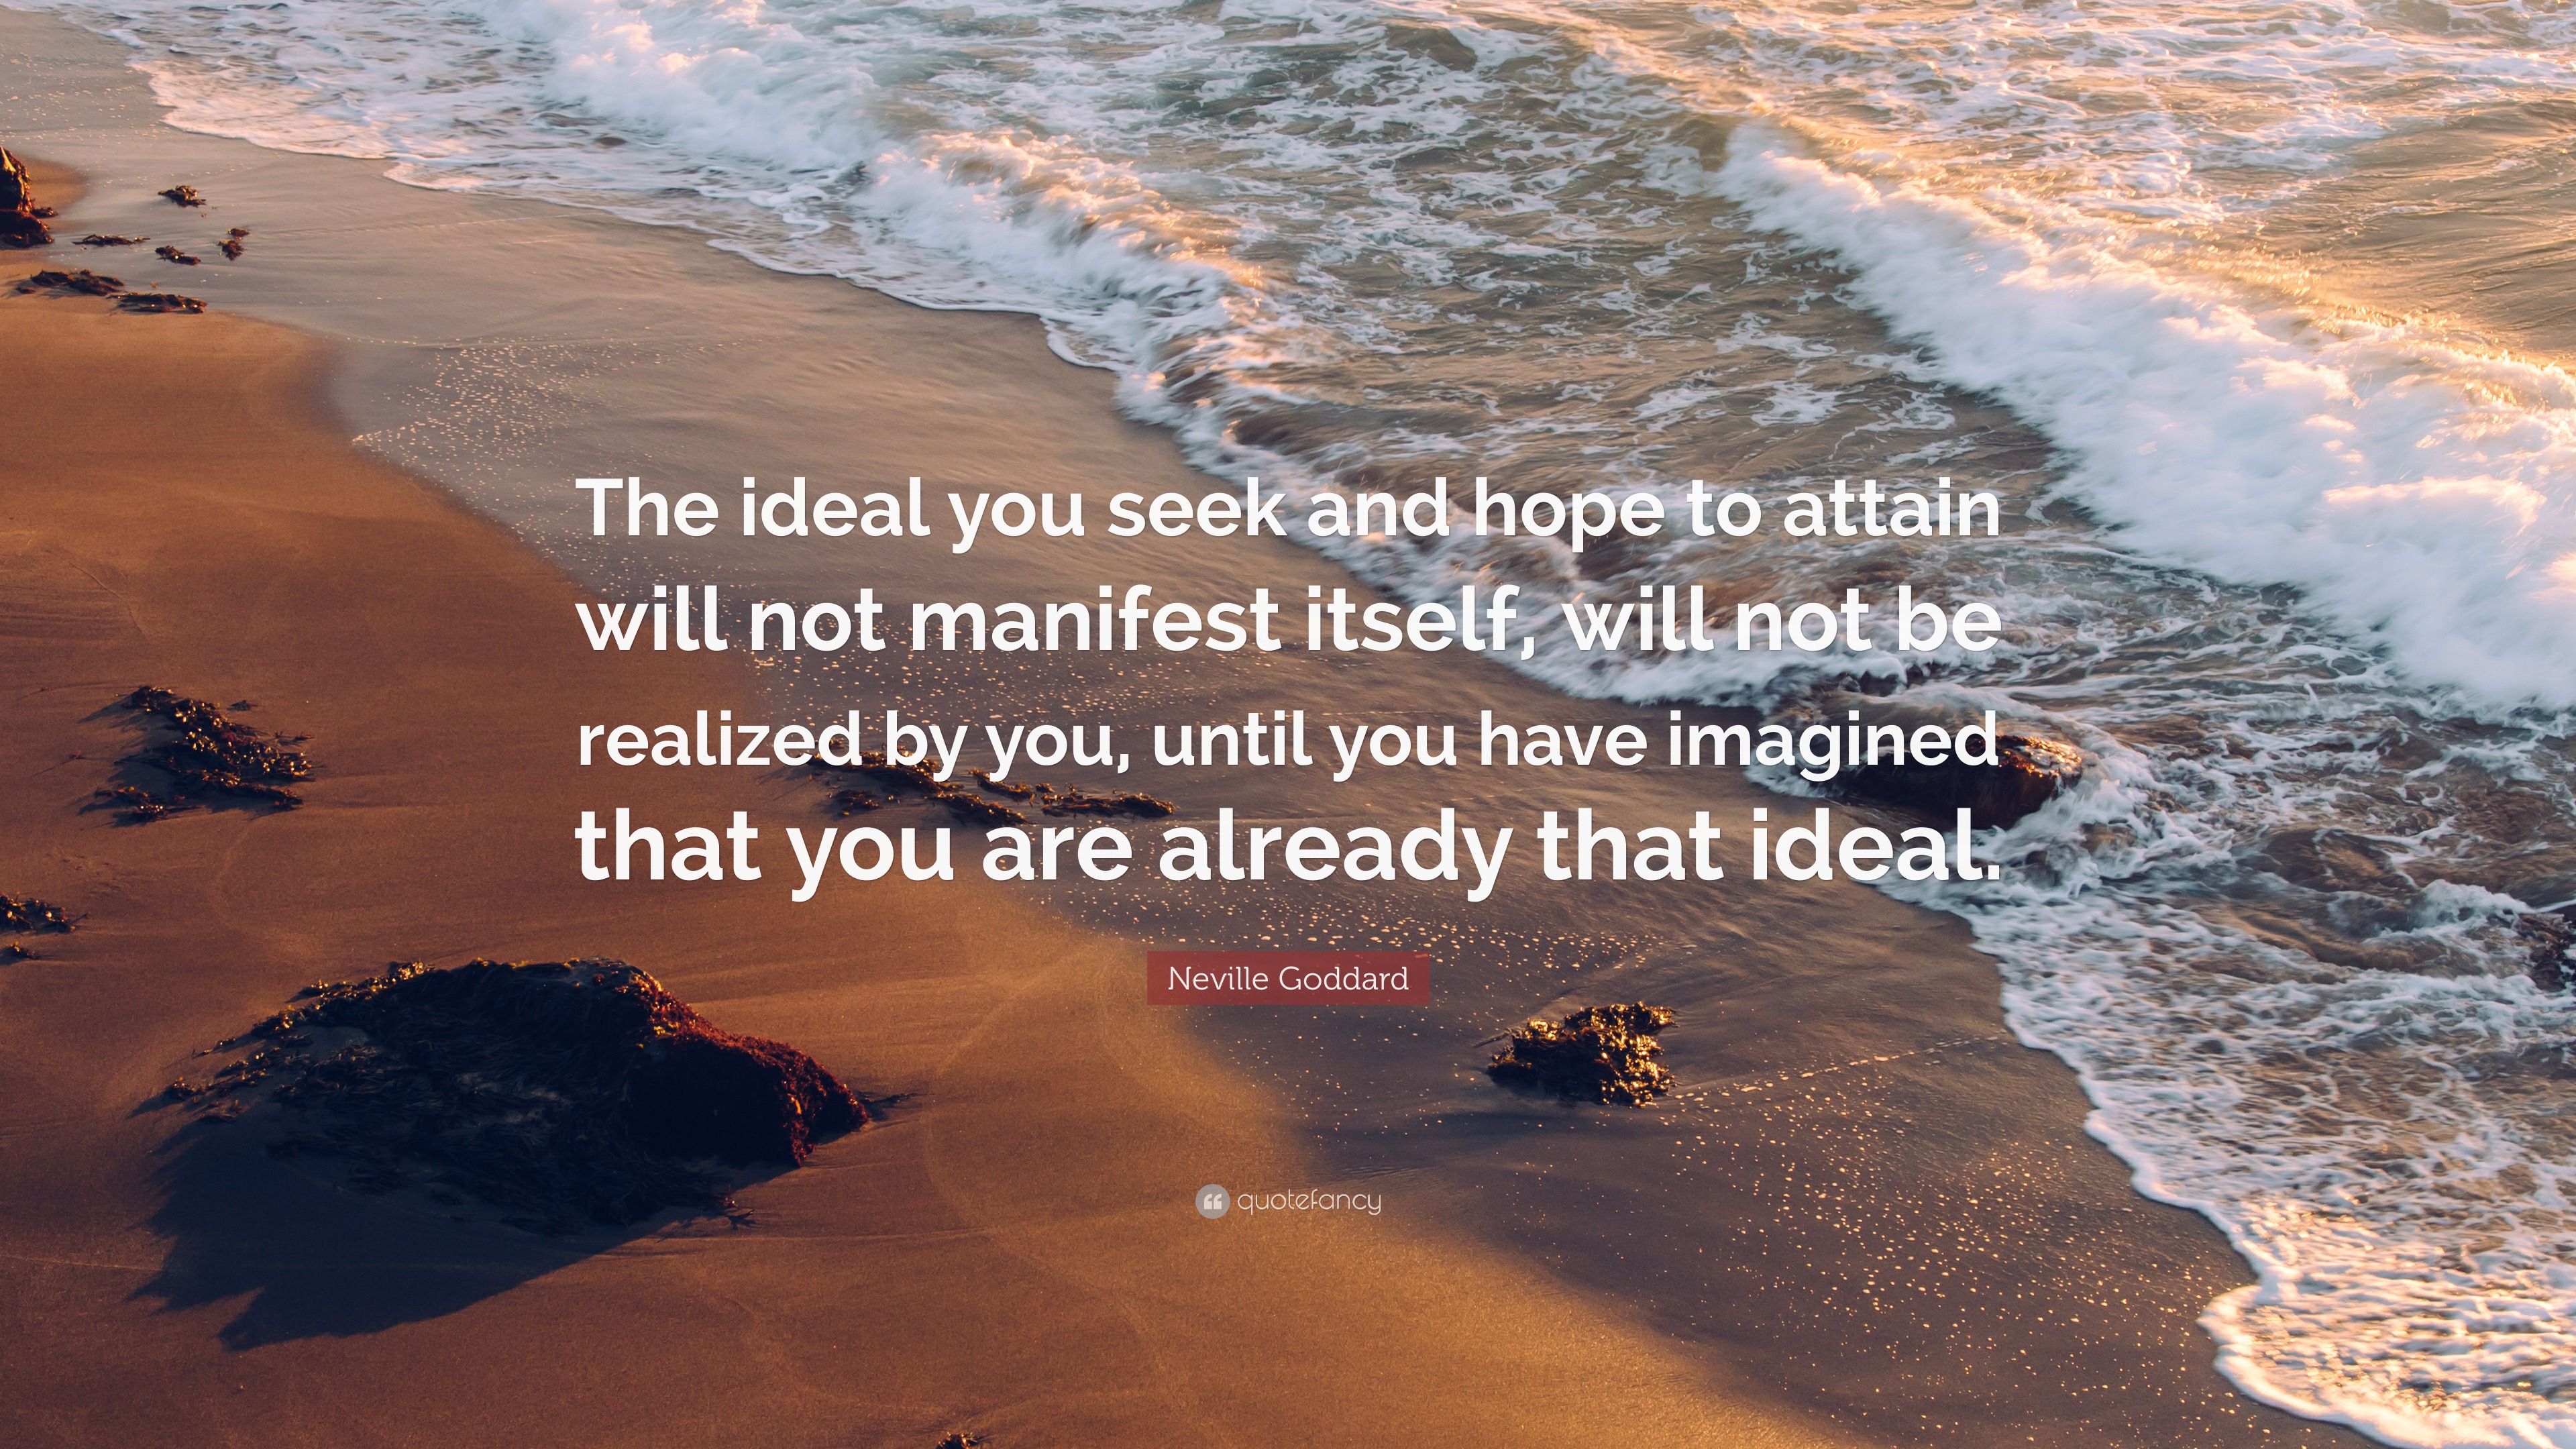 Neville Goddard Quote: “The ideal you seek and hope to attain will not  manifest itself, will not be realized by you, until you have imagined  tha...”